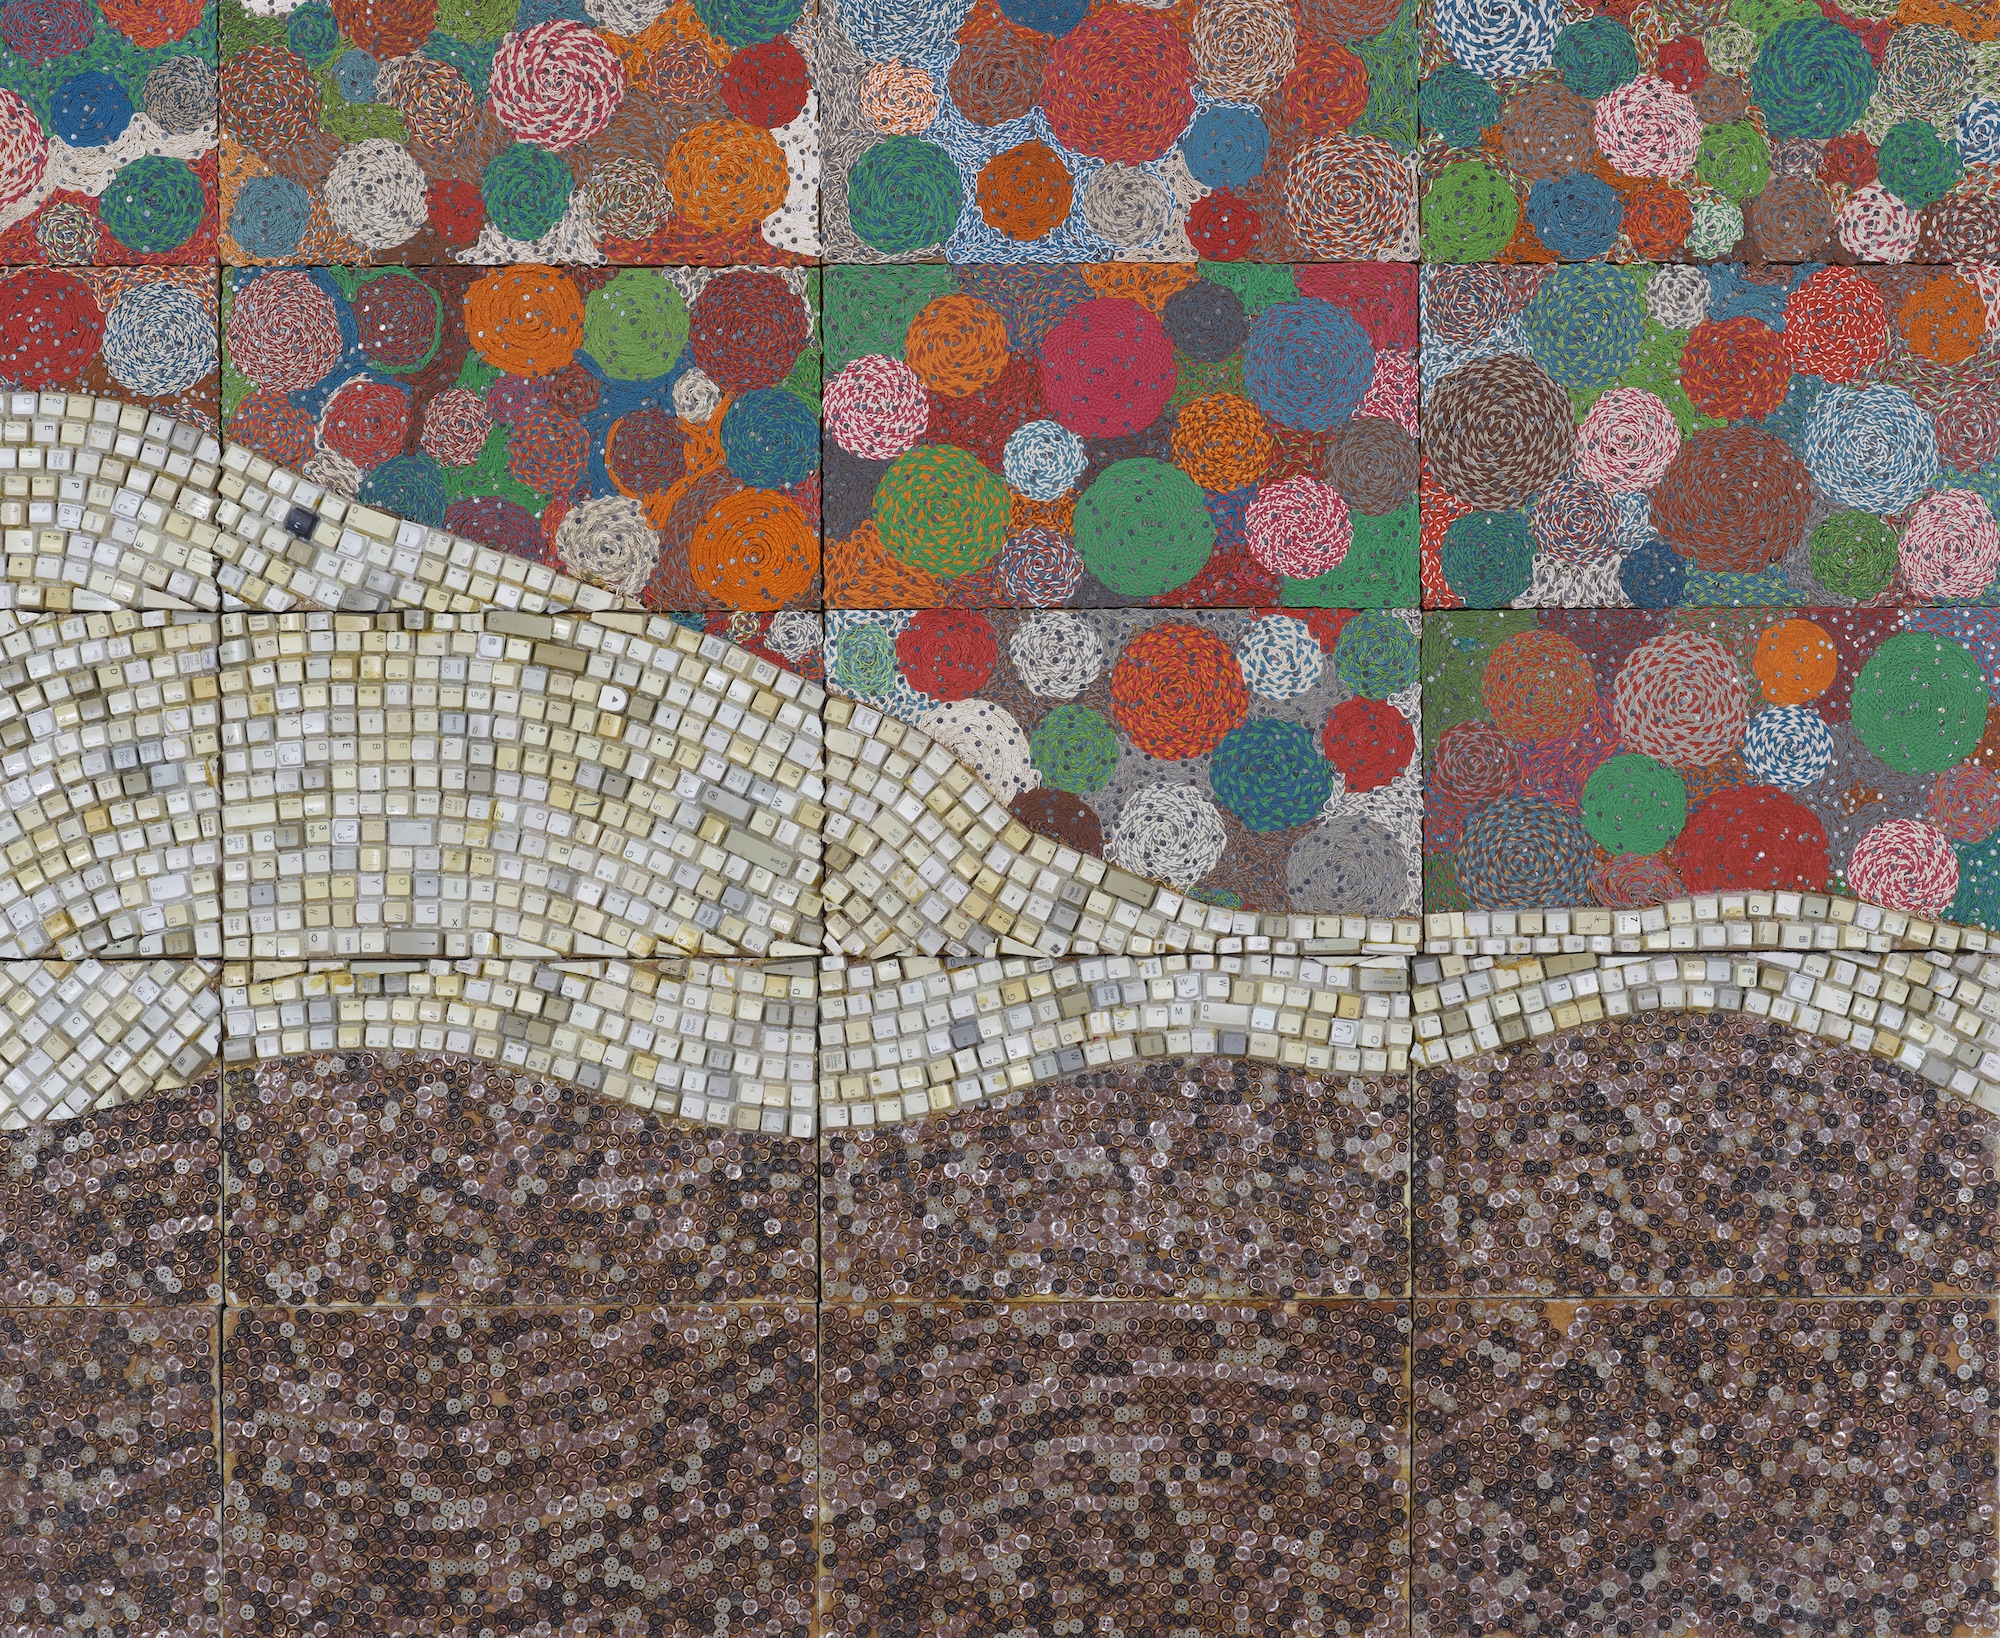 three sections of patterned mosaic designed in curvy layers